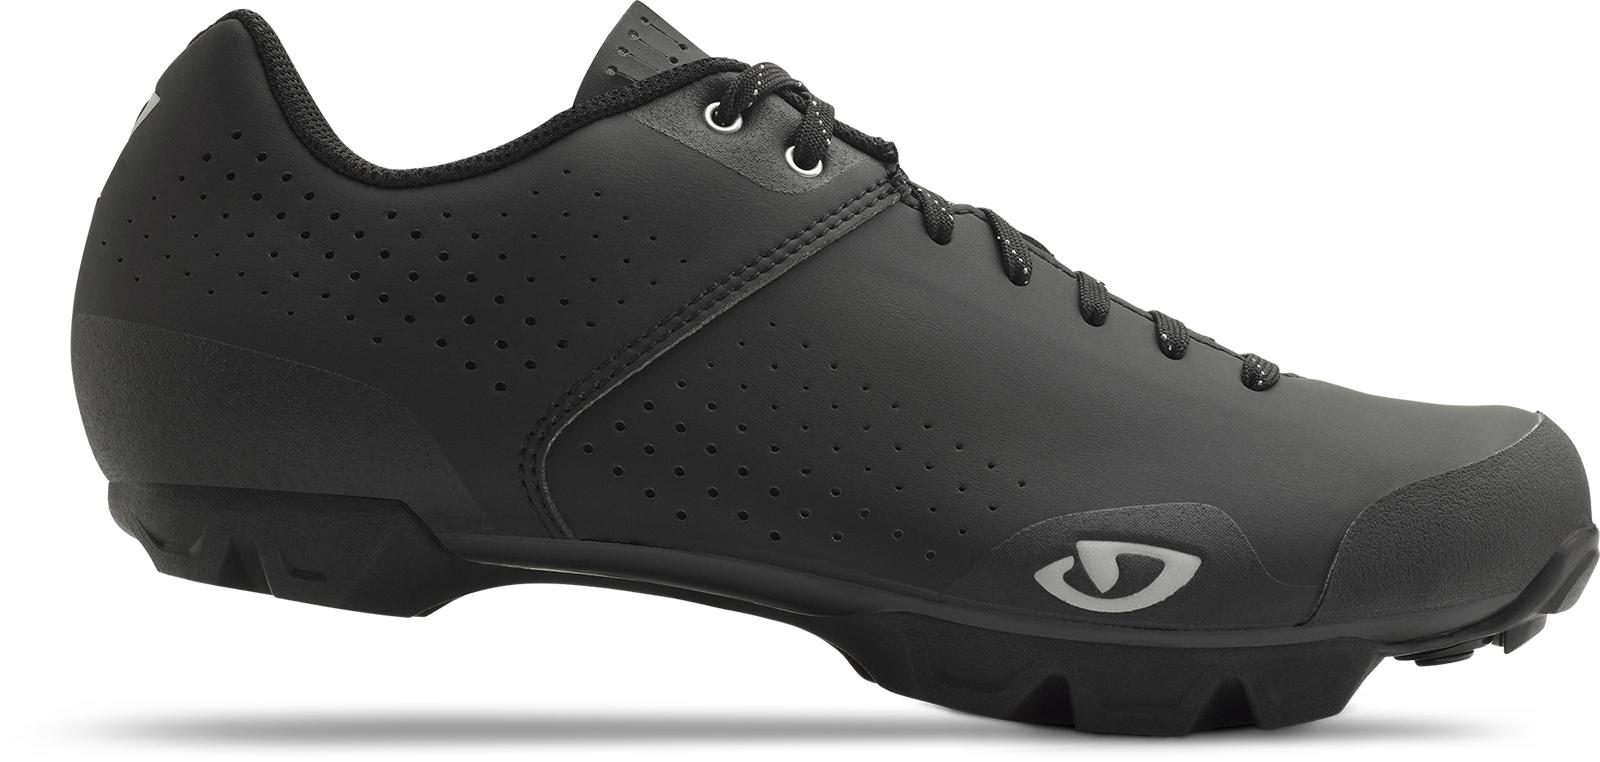 Giro Privateer Lace Mtb Cycling Shoes - Black